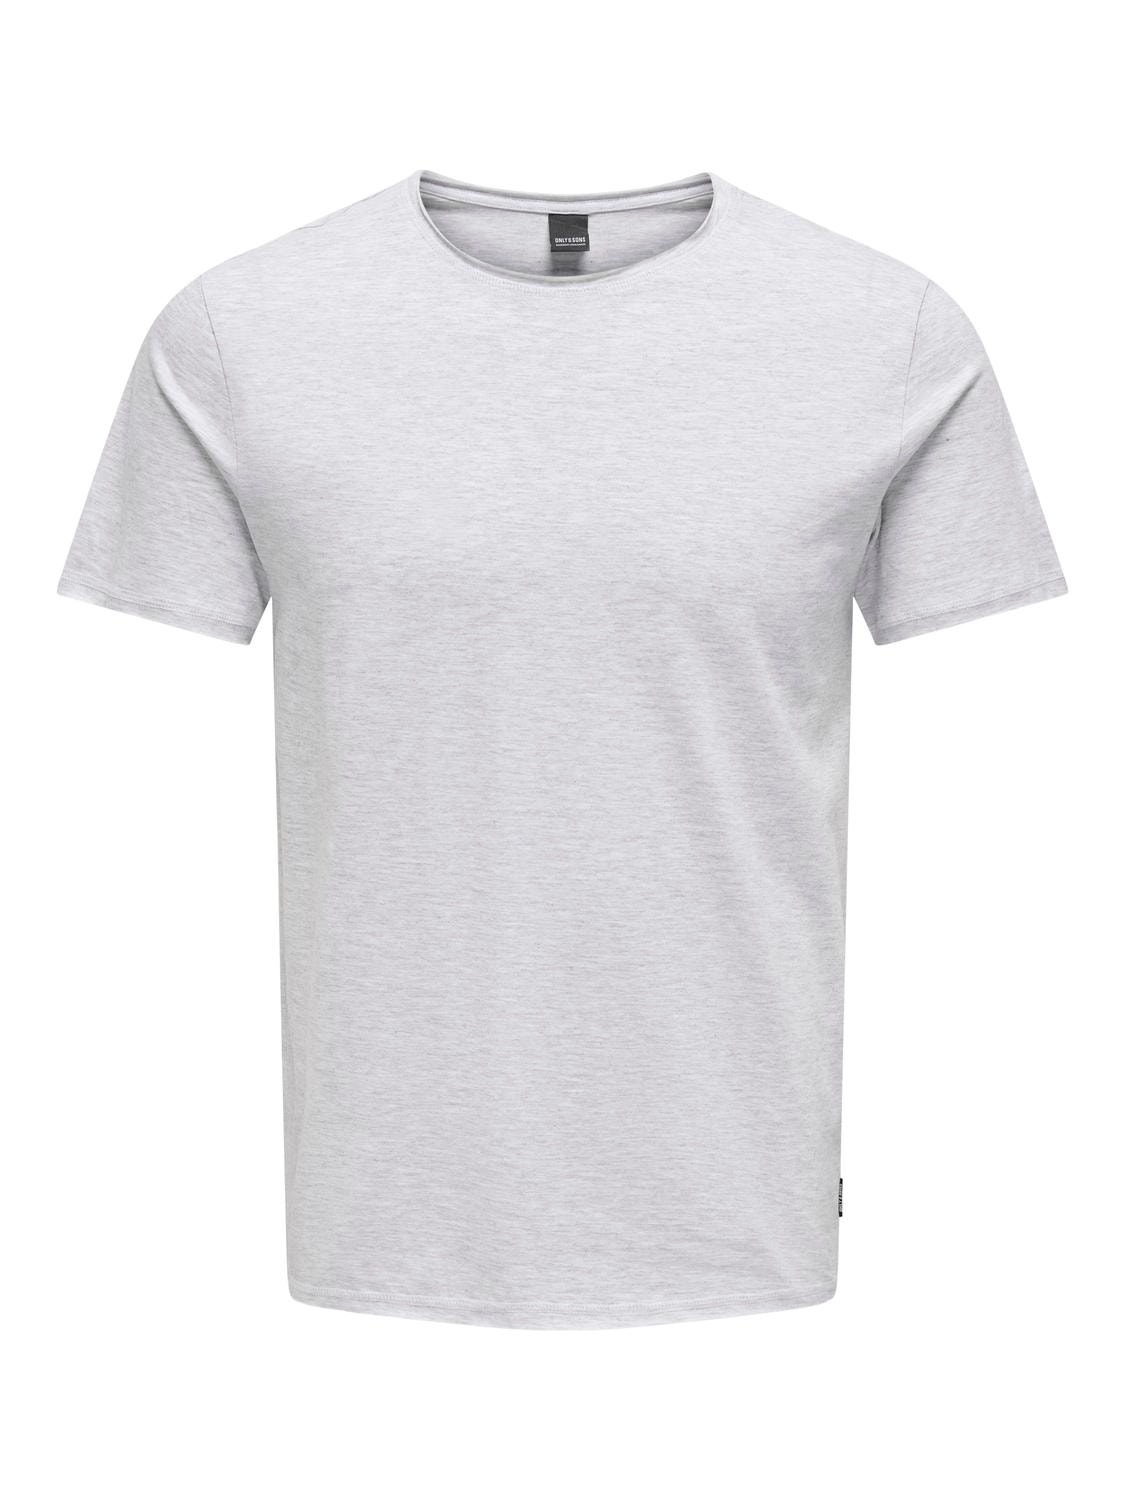 ONLY & SONS O-neck t-shirt -White - 22005108